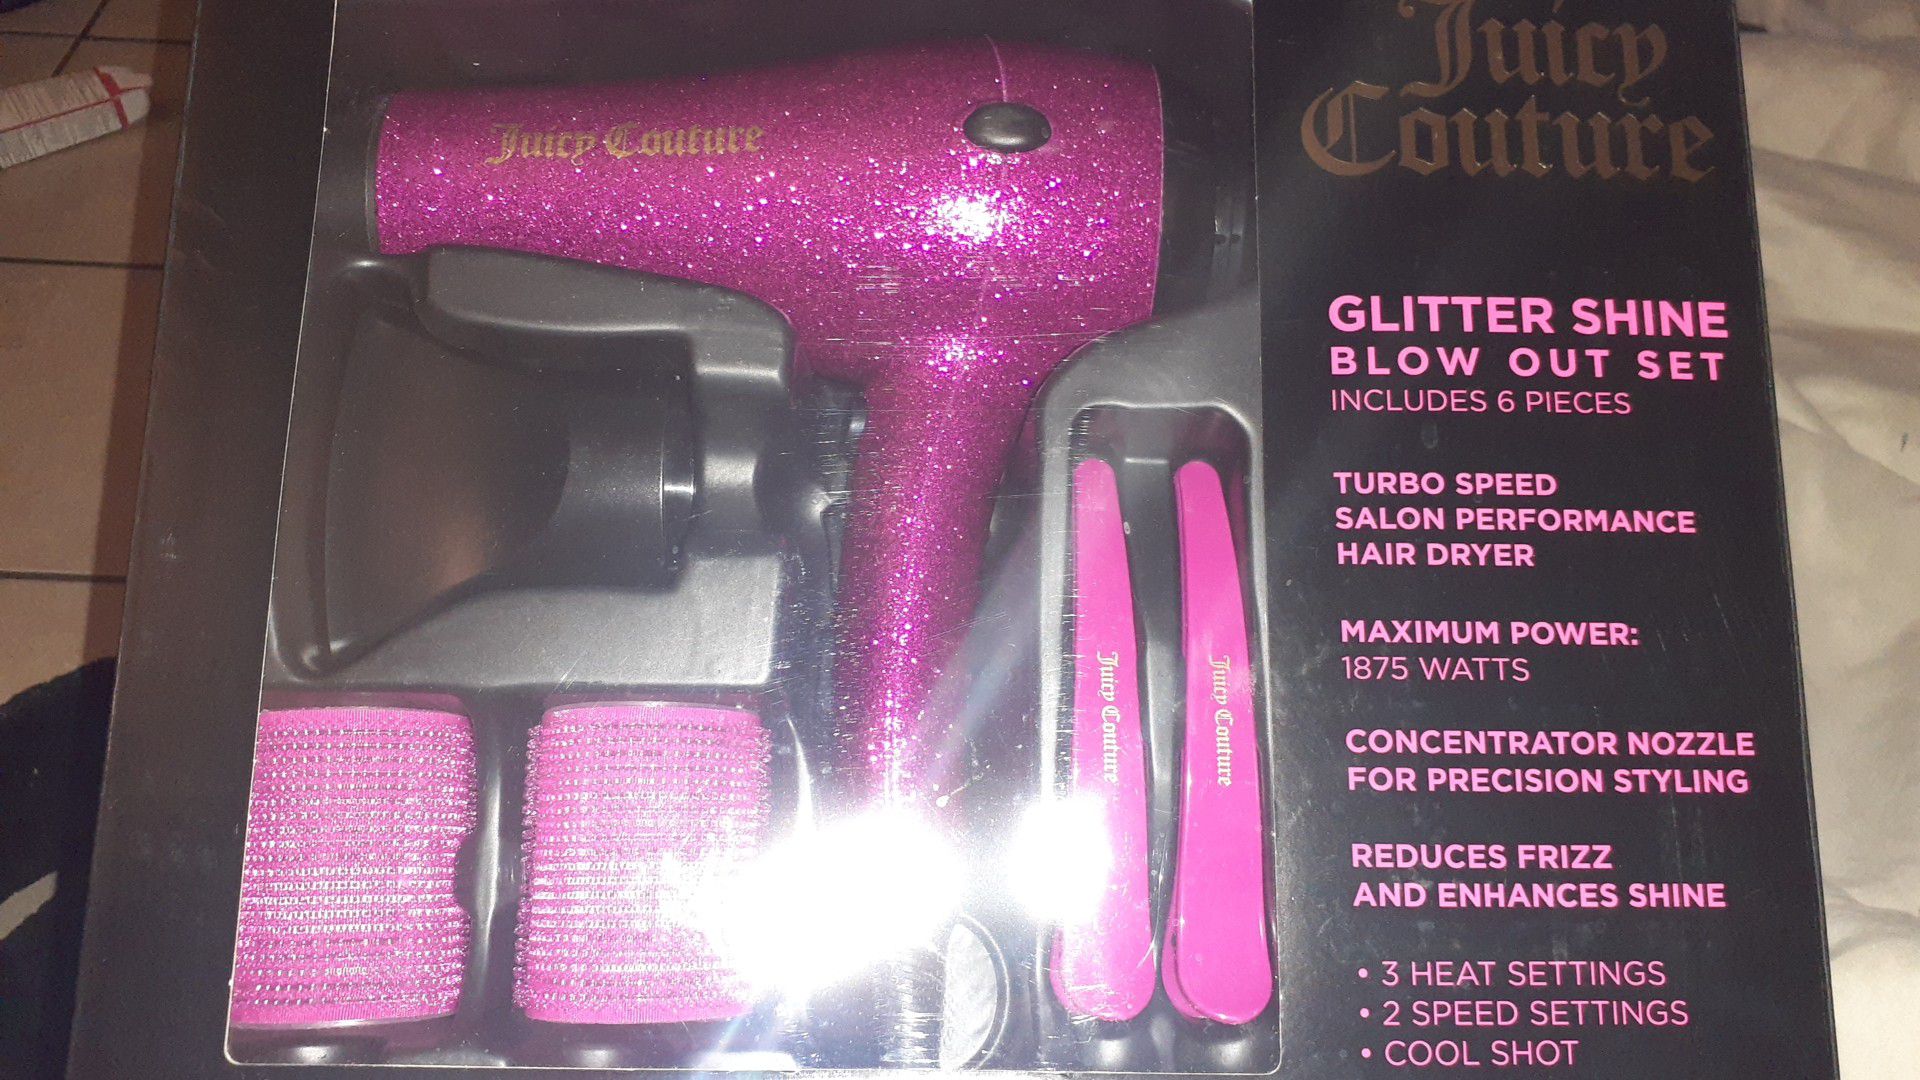 Juicy couture Glitter shine blow out set (6-pieces)